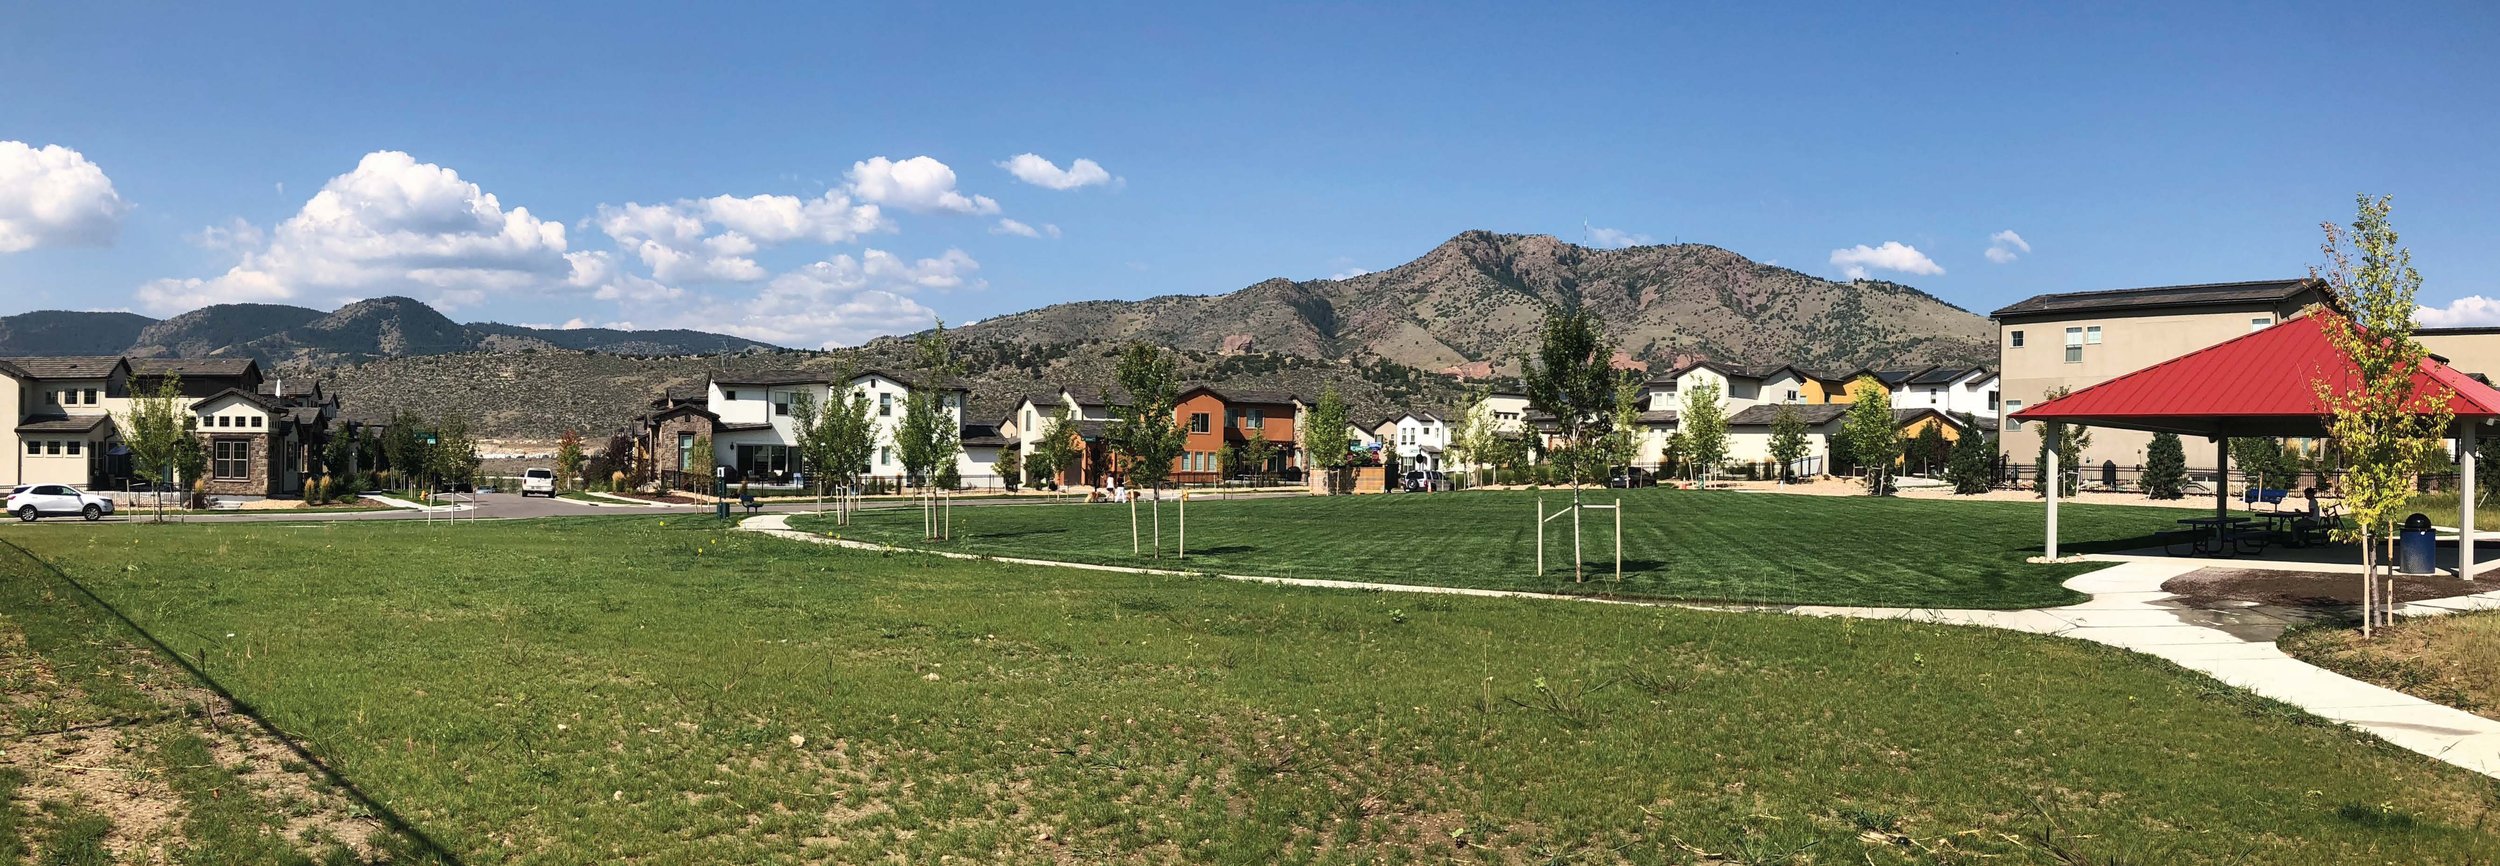 Orchard Park Pano - Looking across native seed to mountains.jpg